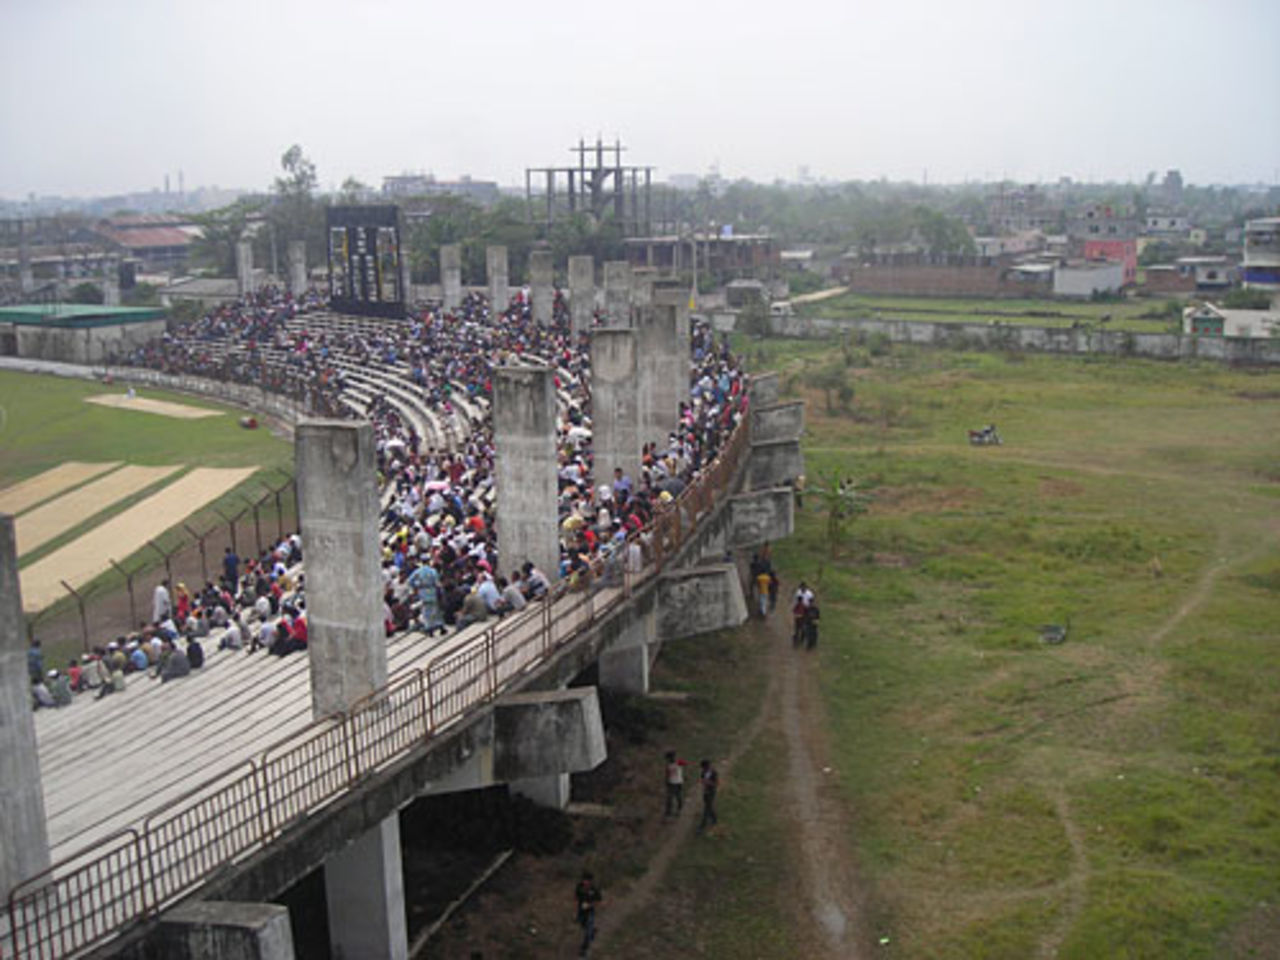 The Khan Shaheb Osman Ali Stadium in Fatullah is accessible only by dirt track, Bangladesh, February 26, 2010